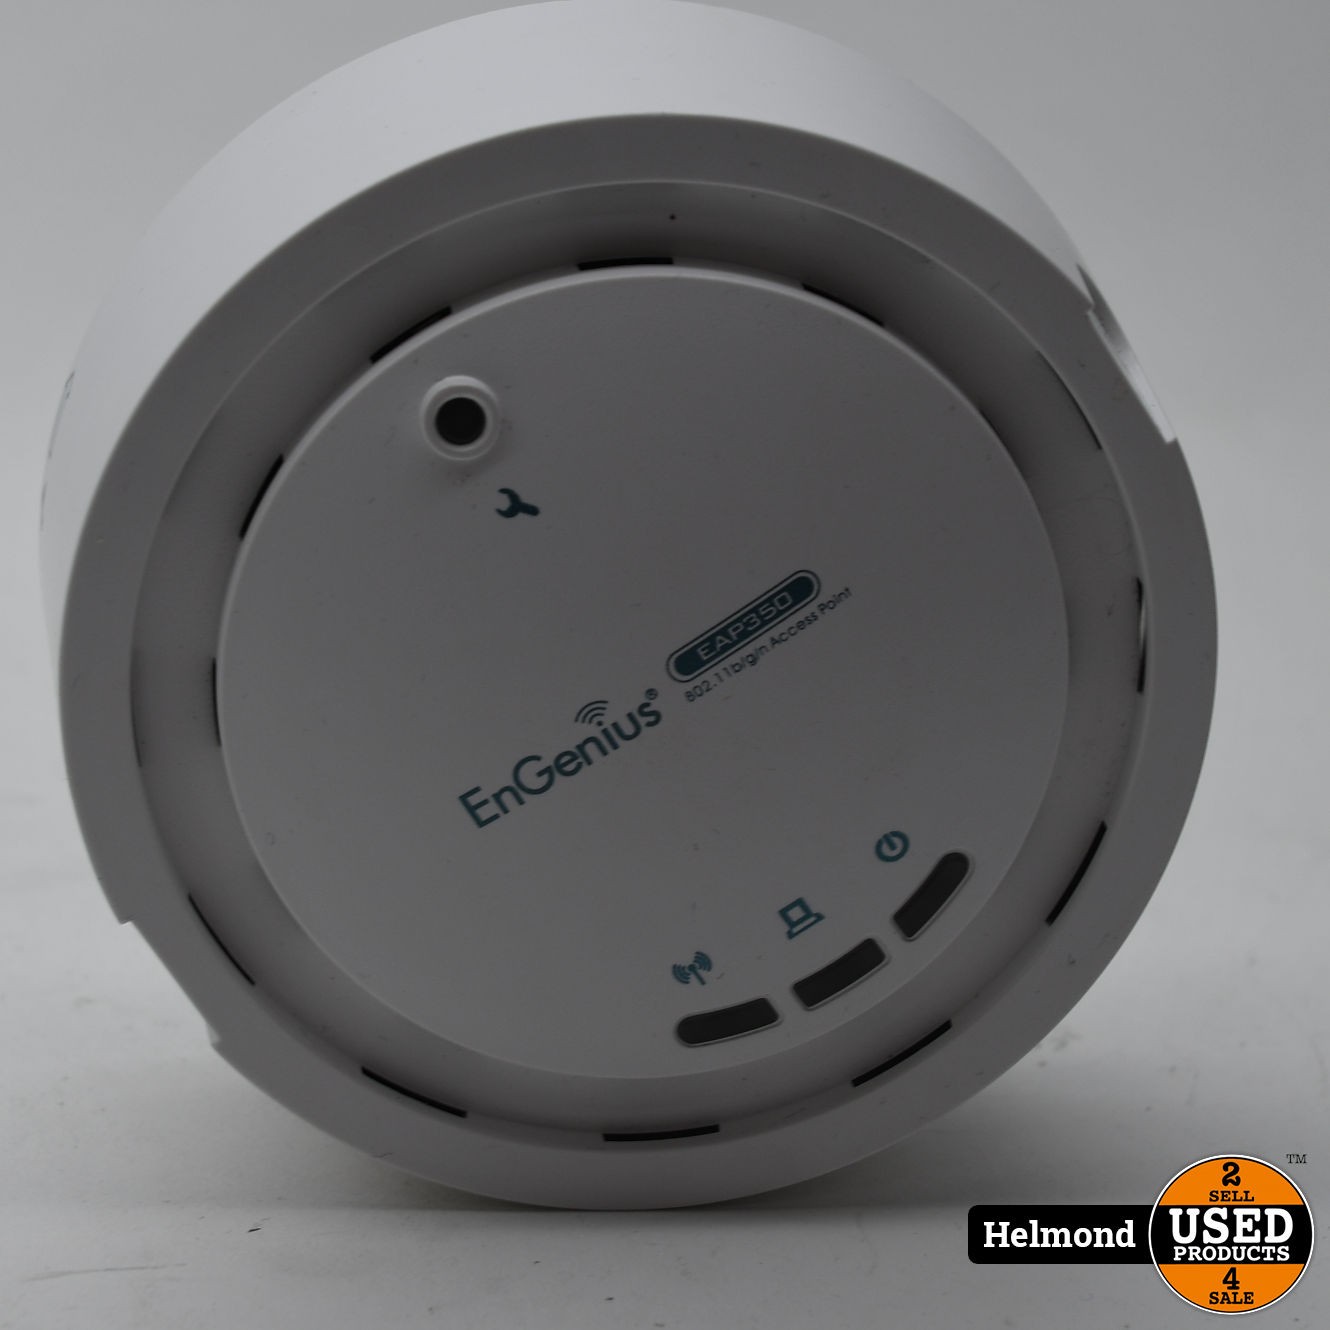 EnGenius EAP350 Wifi | In Staat Used Products Helmond